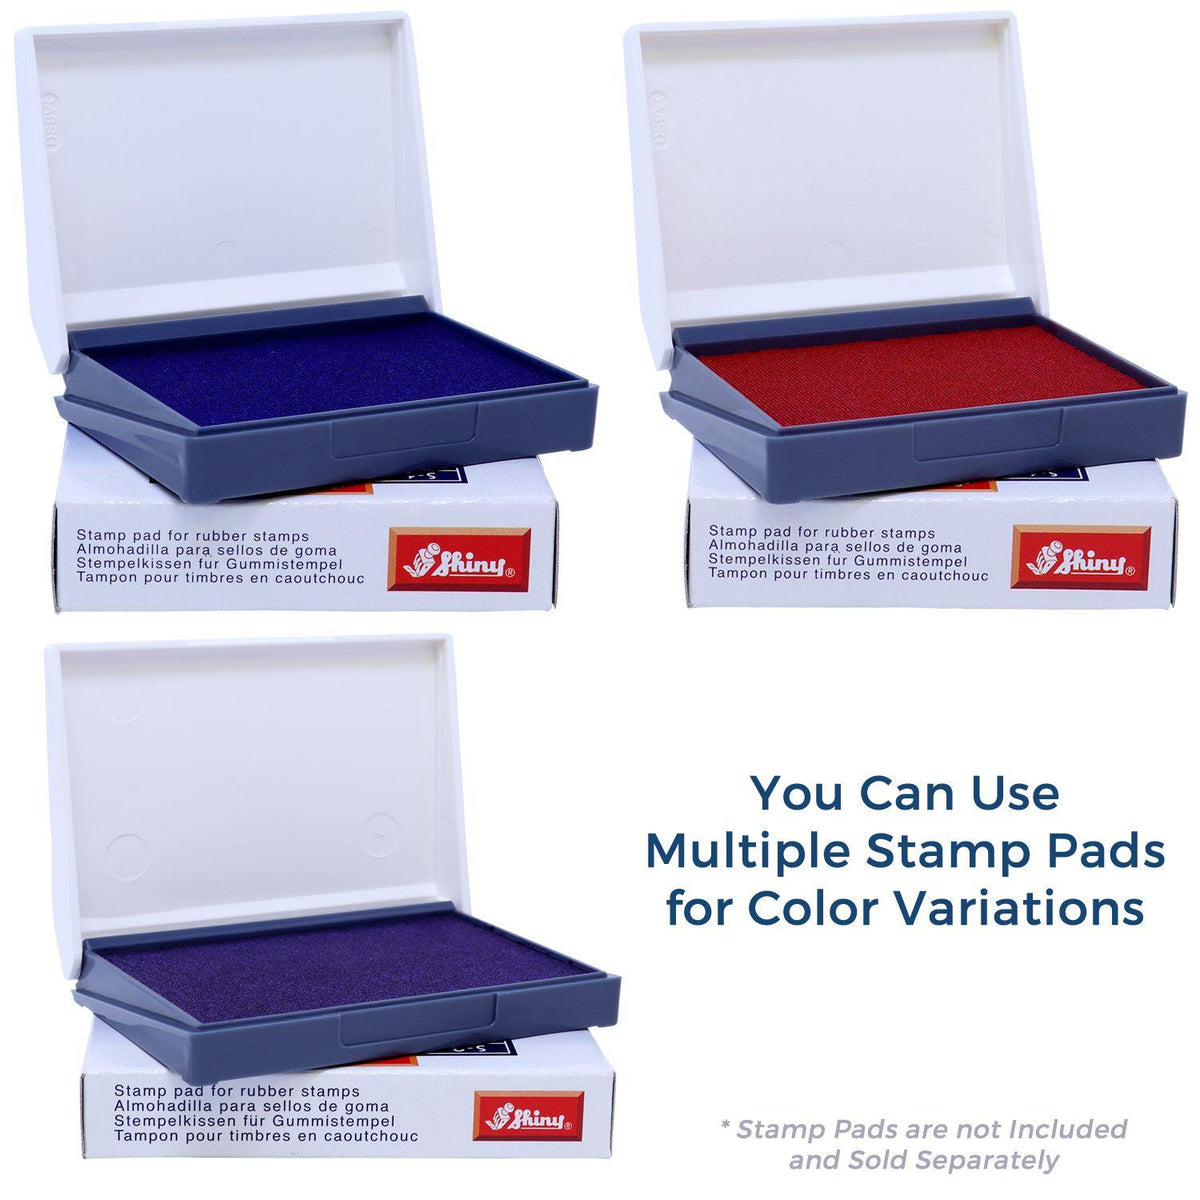 Stamp Pads for Large Escrow Account Rubber Stamp Available